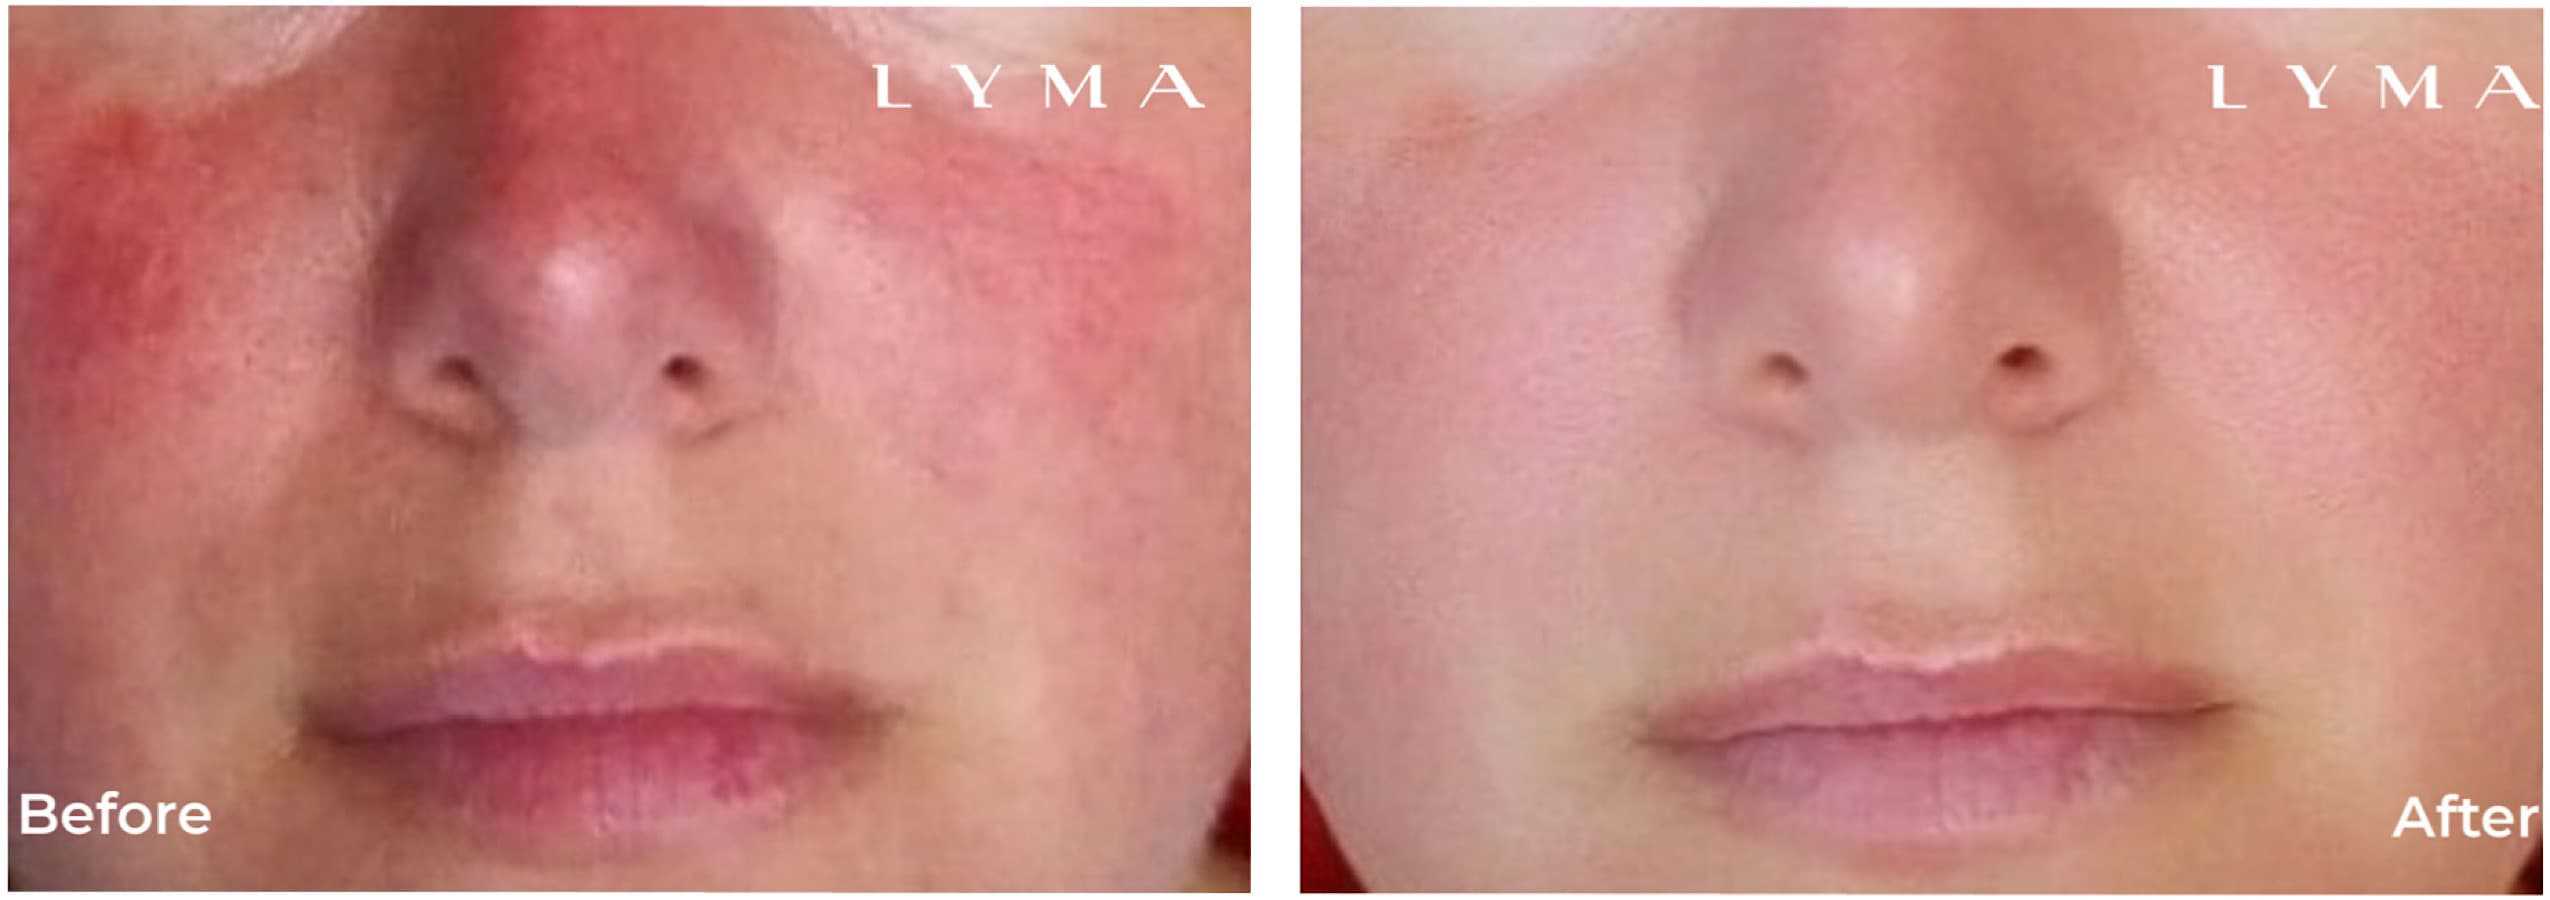 Before and after photos of subject with rosacea treated with the LYMA Laser.